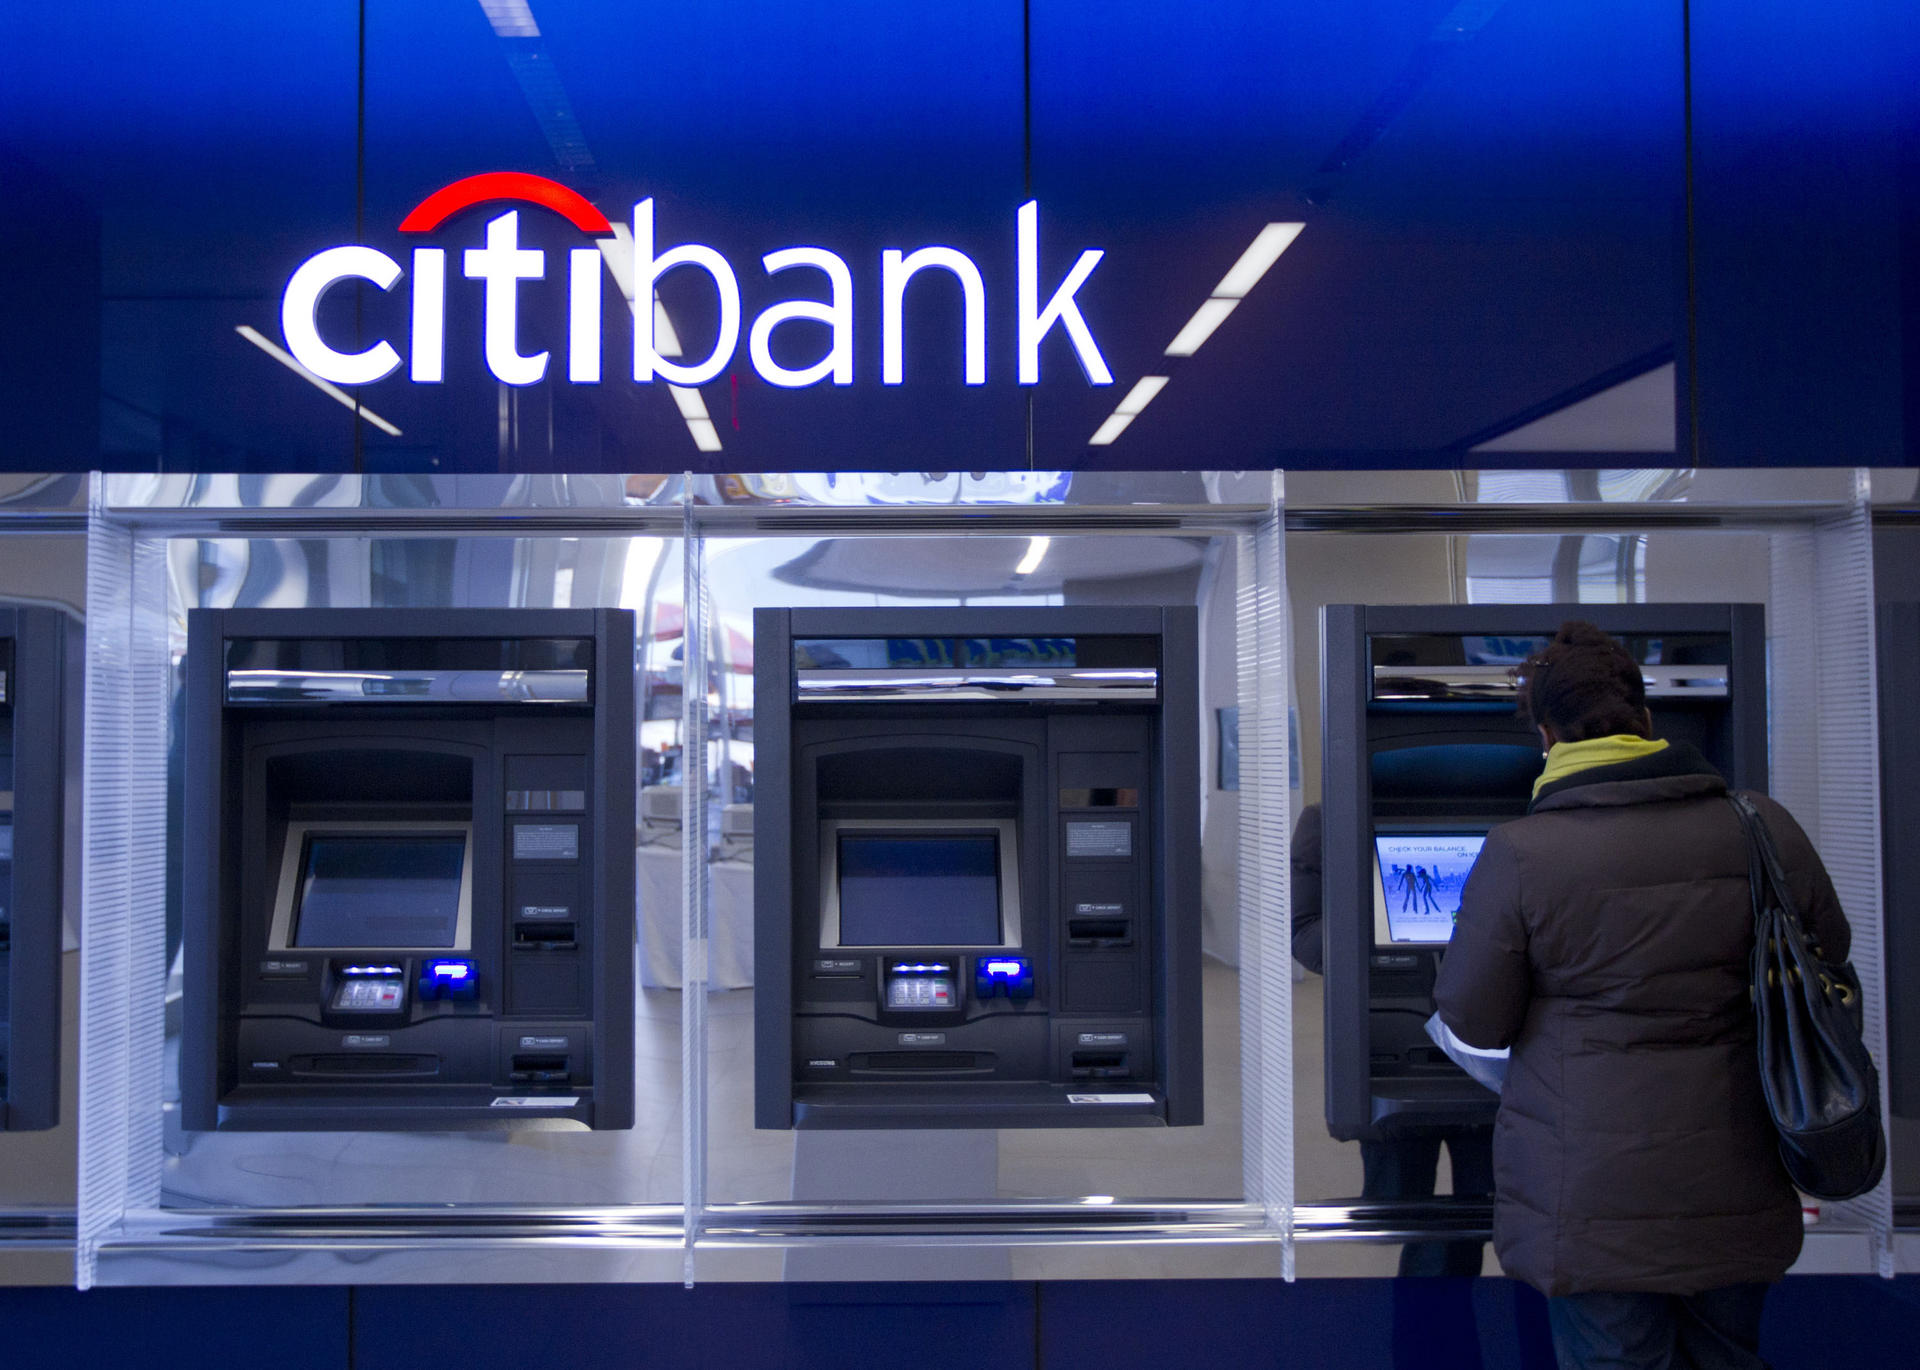 Citi has agreed to pay a US$1.02 billion fine as part of the deal to settle civil claims of foreign exchange rate rigging. Photo: Bloomberg